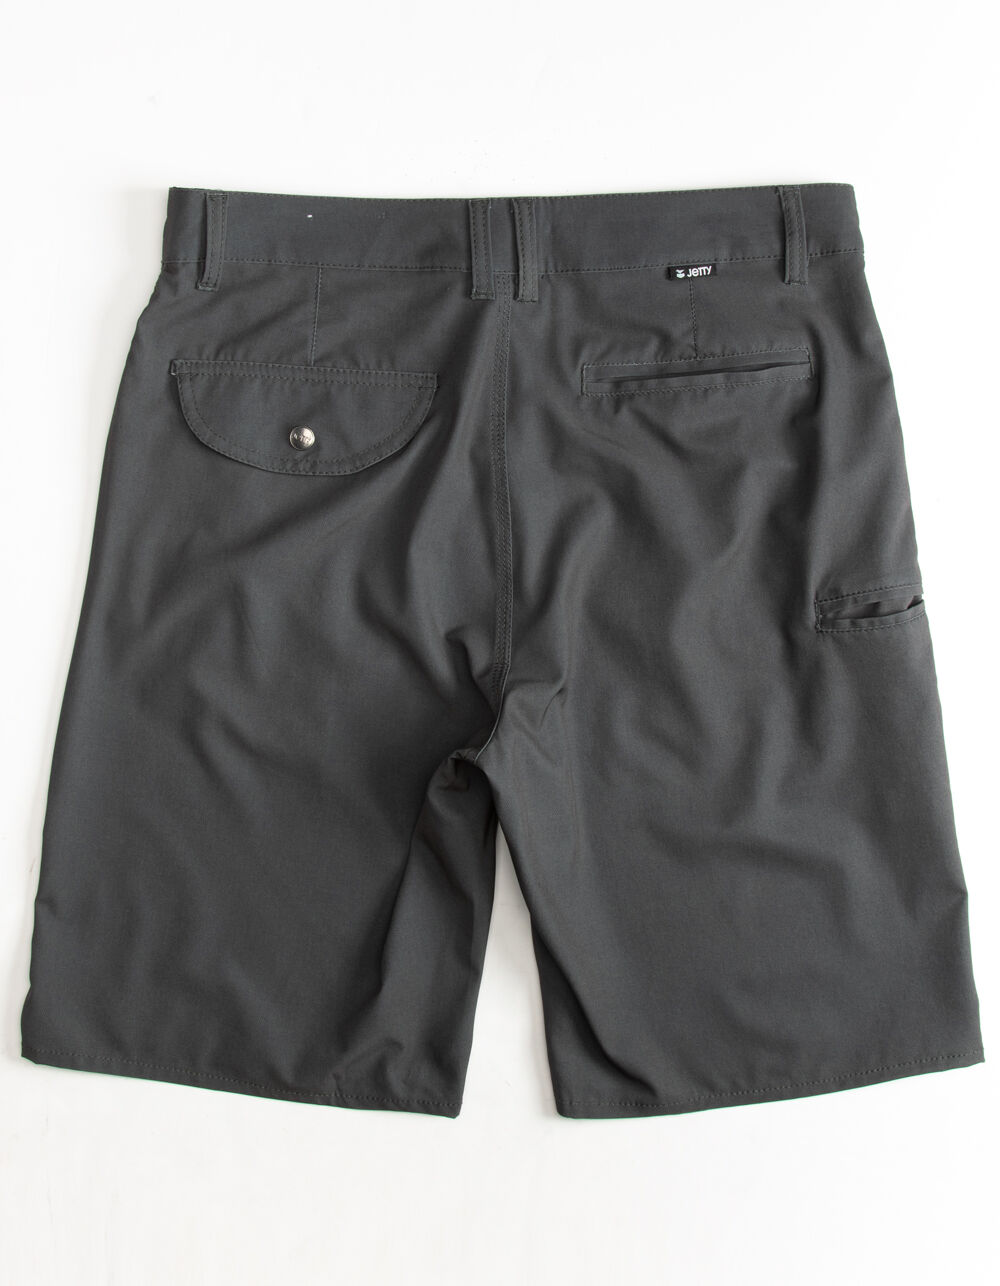 JETTY Polywog Mens Charcoal Hybrid Shorts - CHARCOAL | Tillys